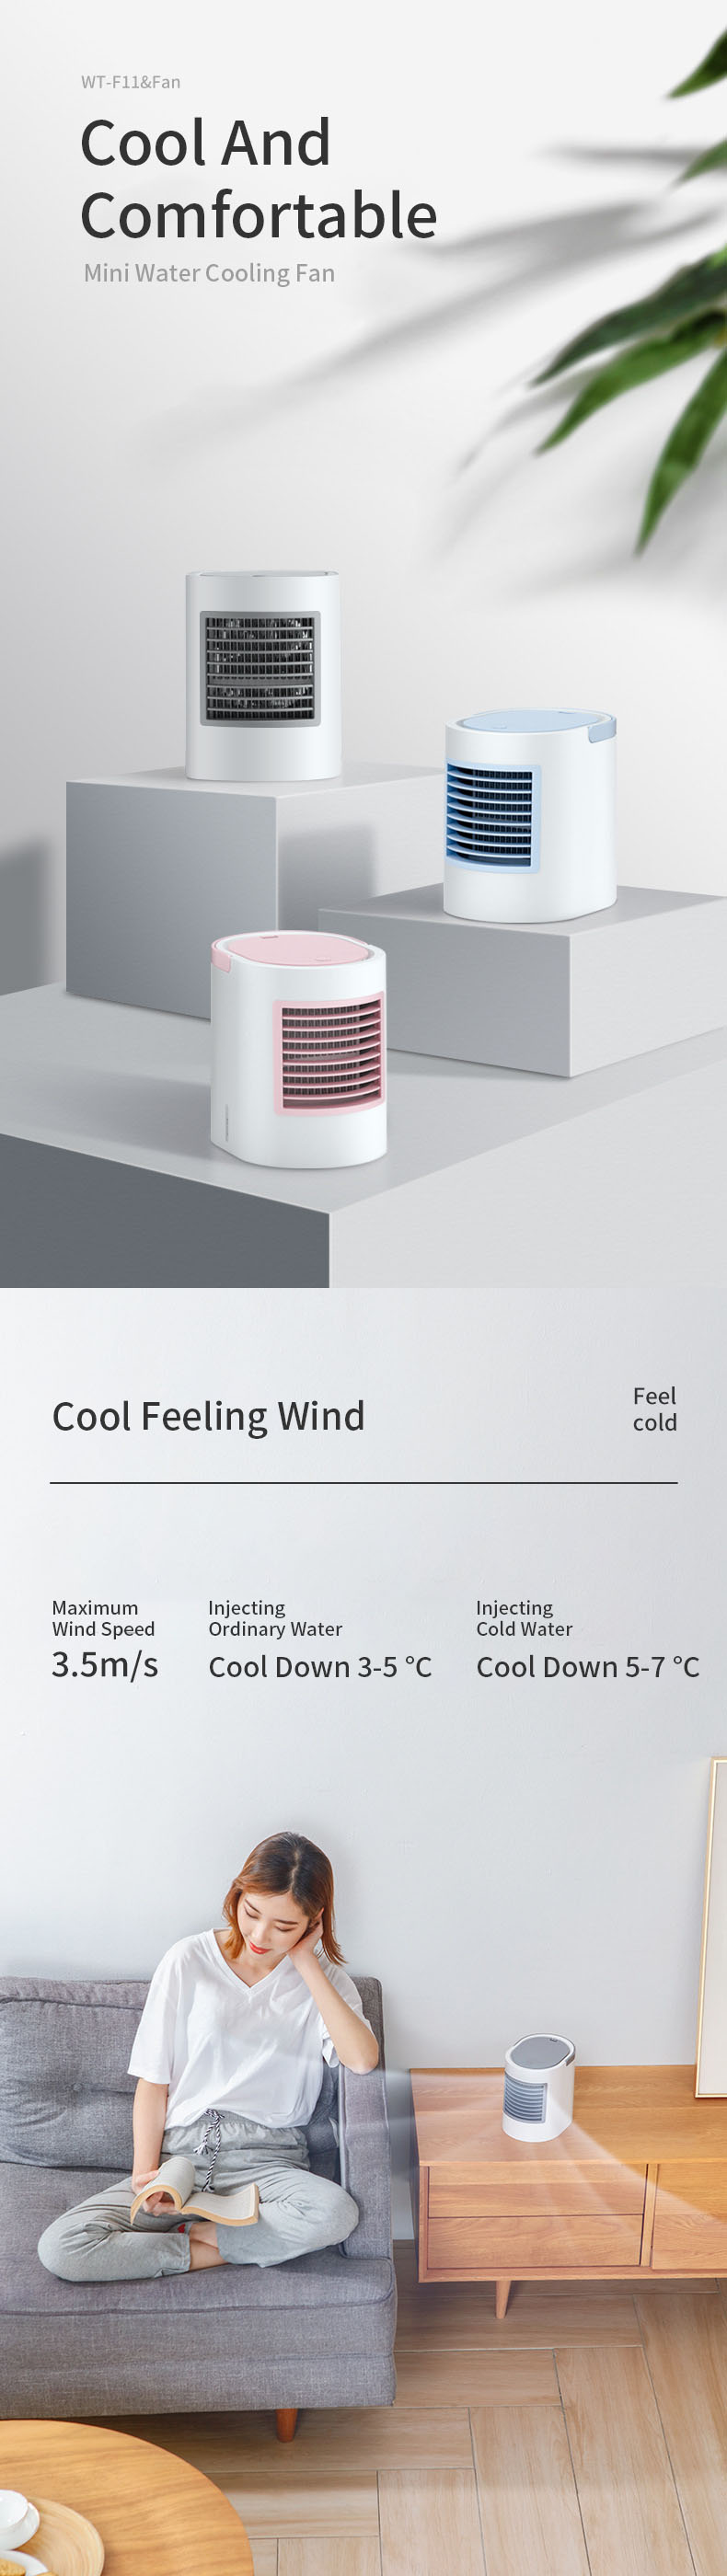 SOTHING WT-F11 Portable Electric Micro Negative Ion Air Conditioning Fan Air Cooler Cooling Fan For Office Home USB Air Conditioner 15